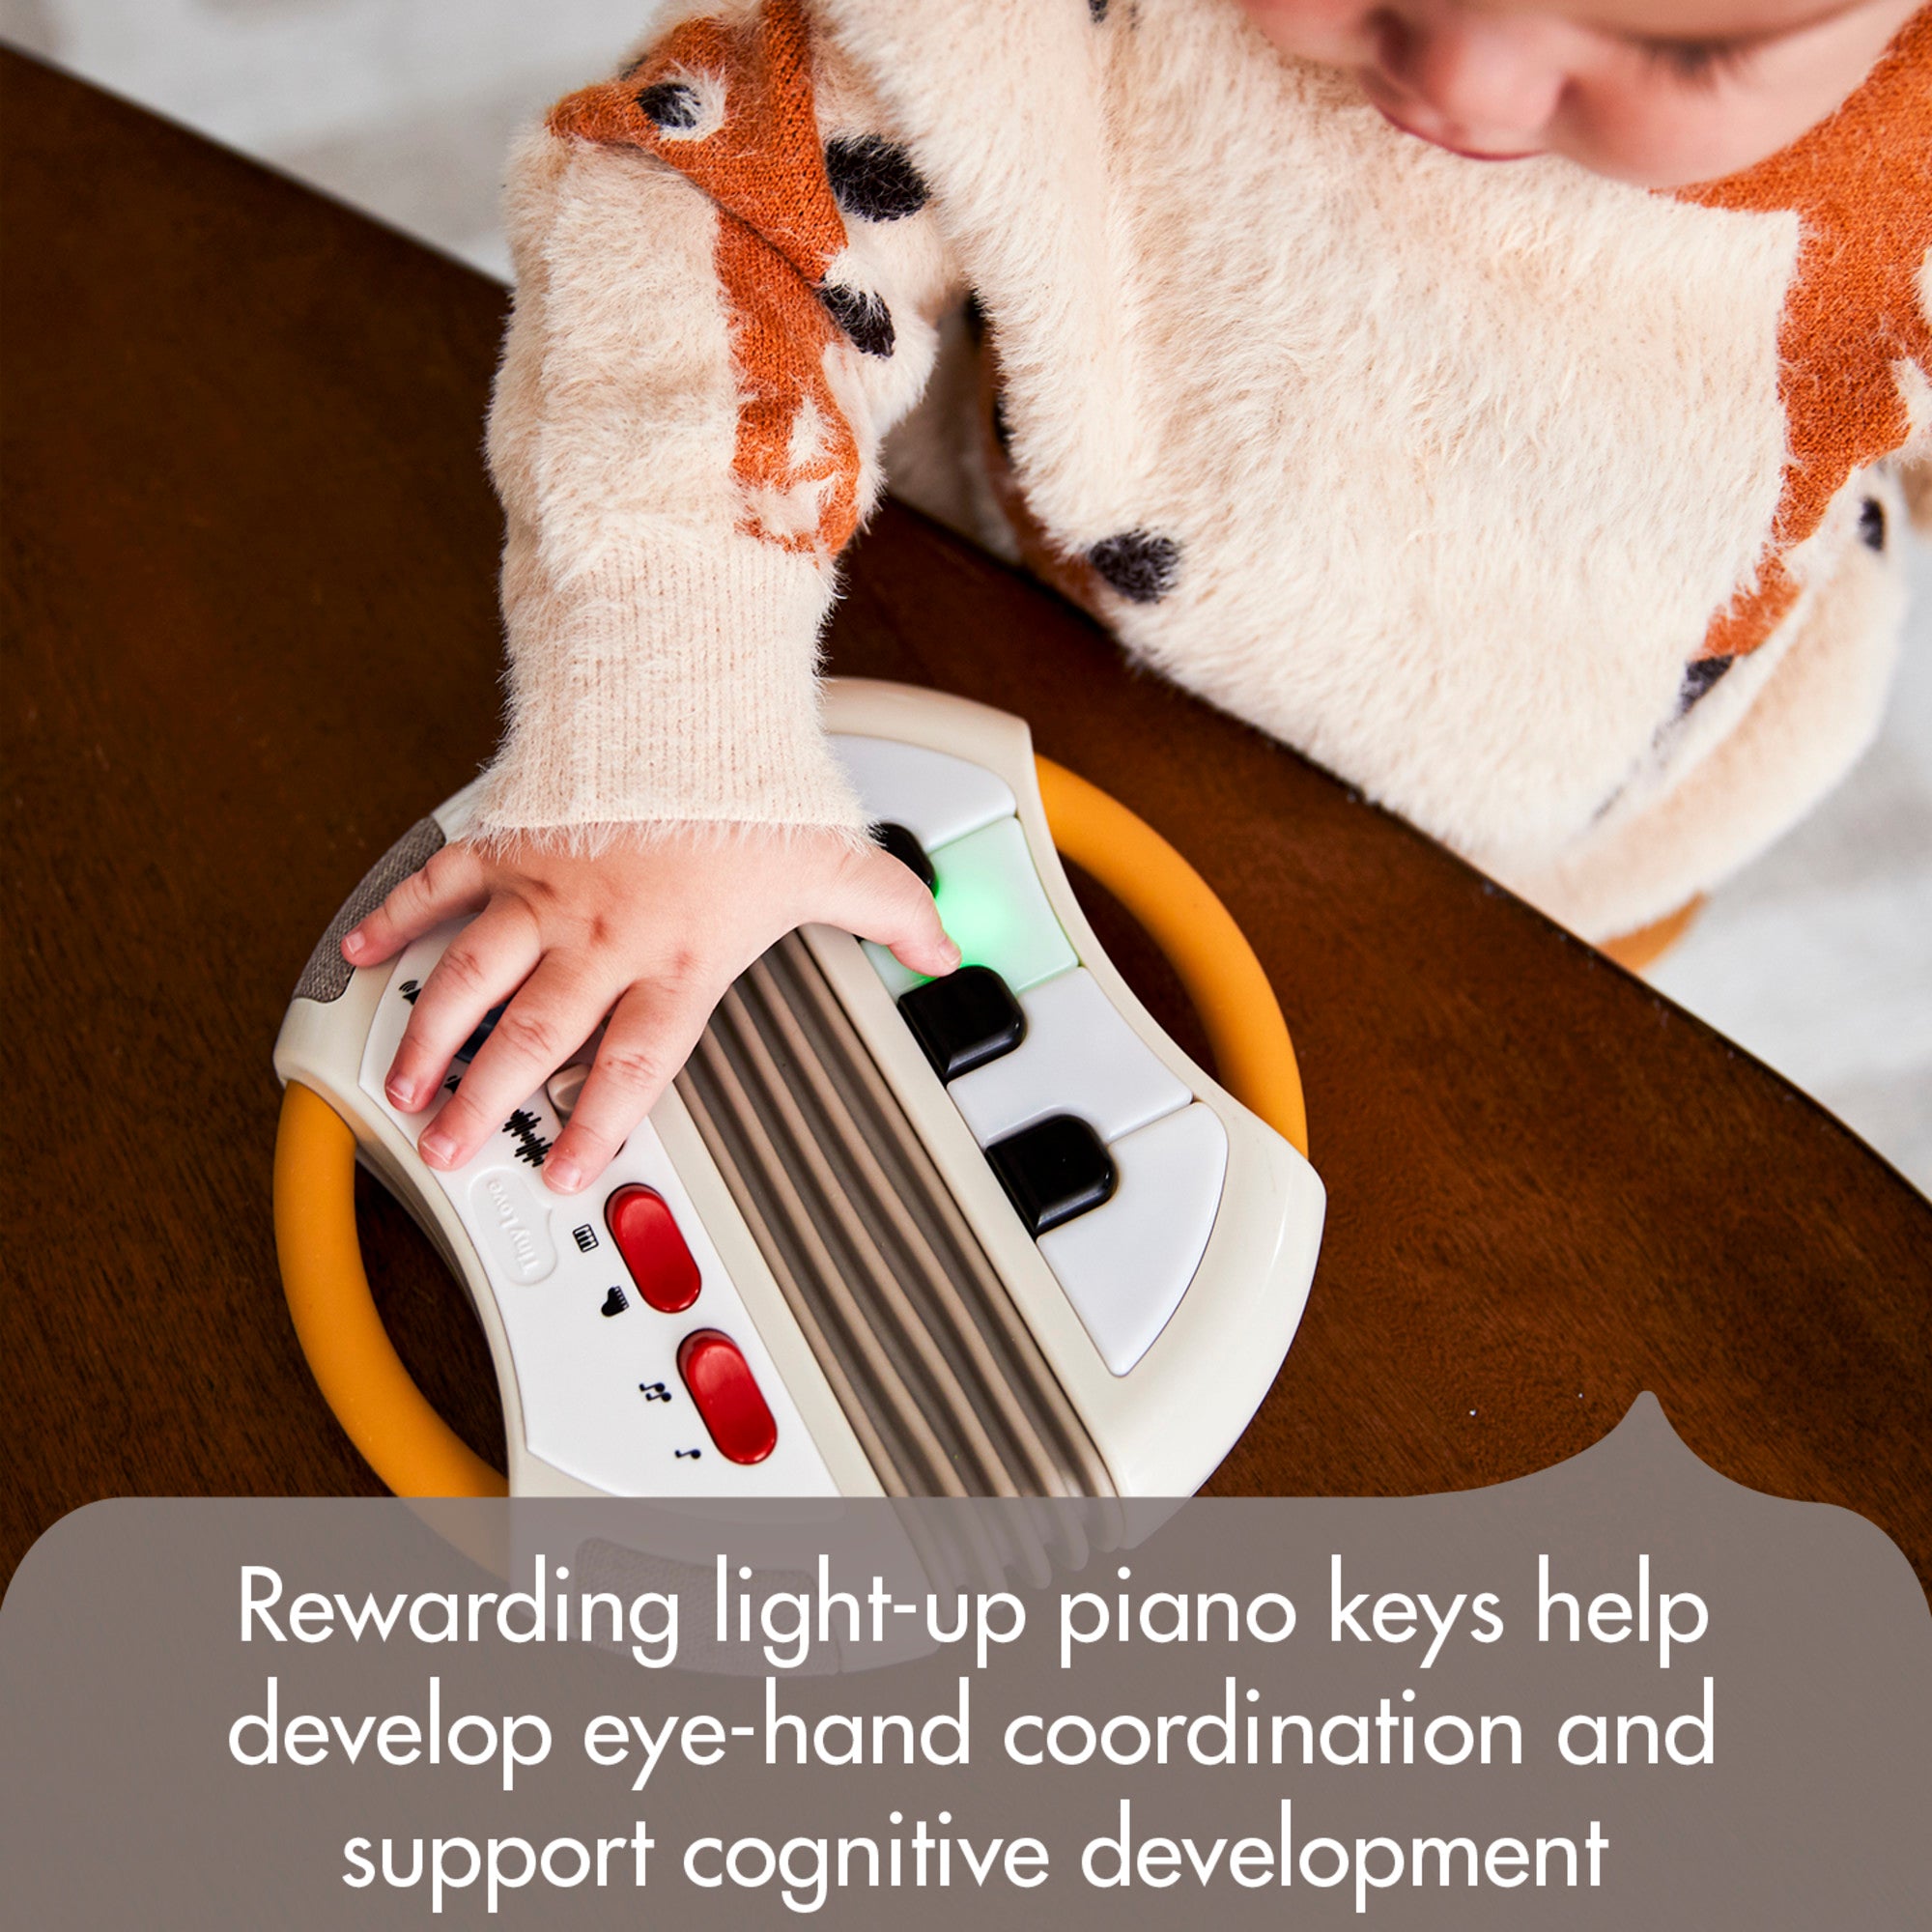 Tiny Rockers Accordion - Rewarding light-up piano keys help develop eye-hand coordination and support cognitive development